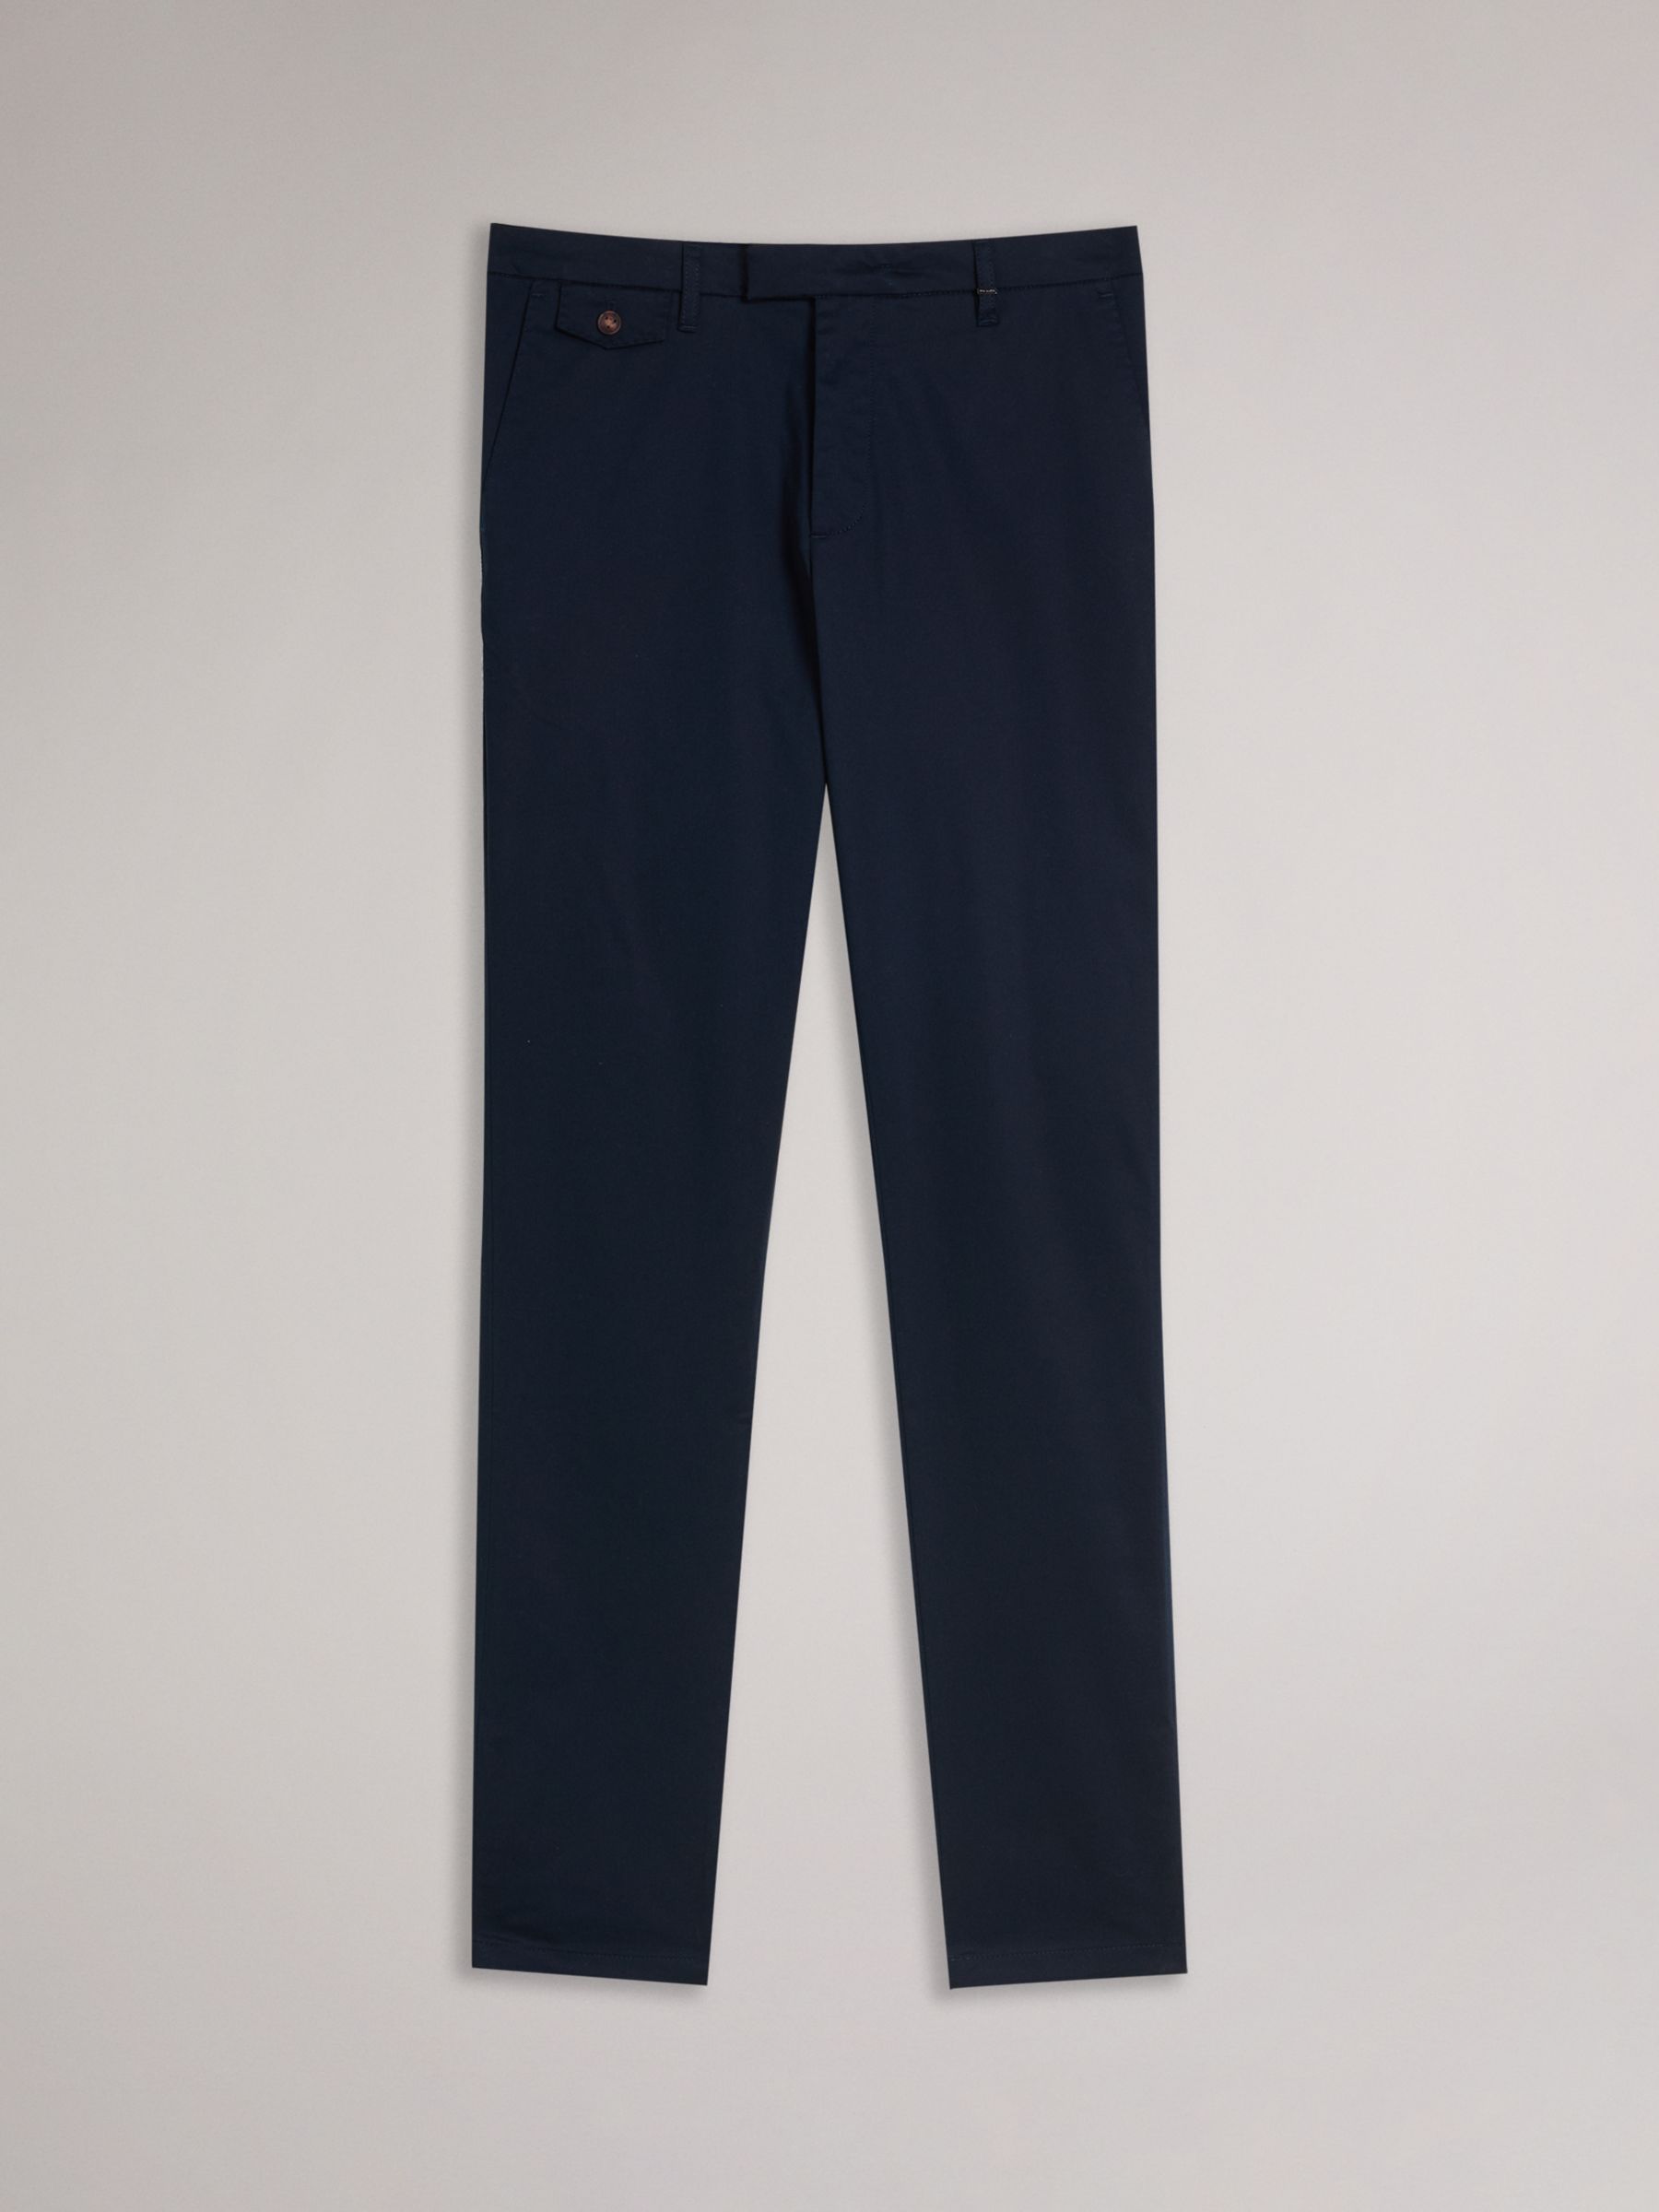 Ted Baker Danay Irvine Slim Fit Trousers, Navy at John Lewis & Partners